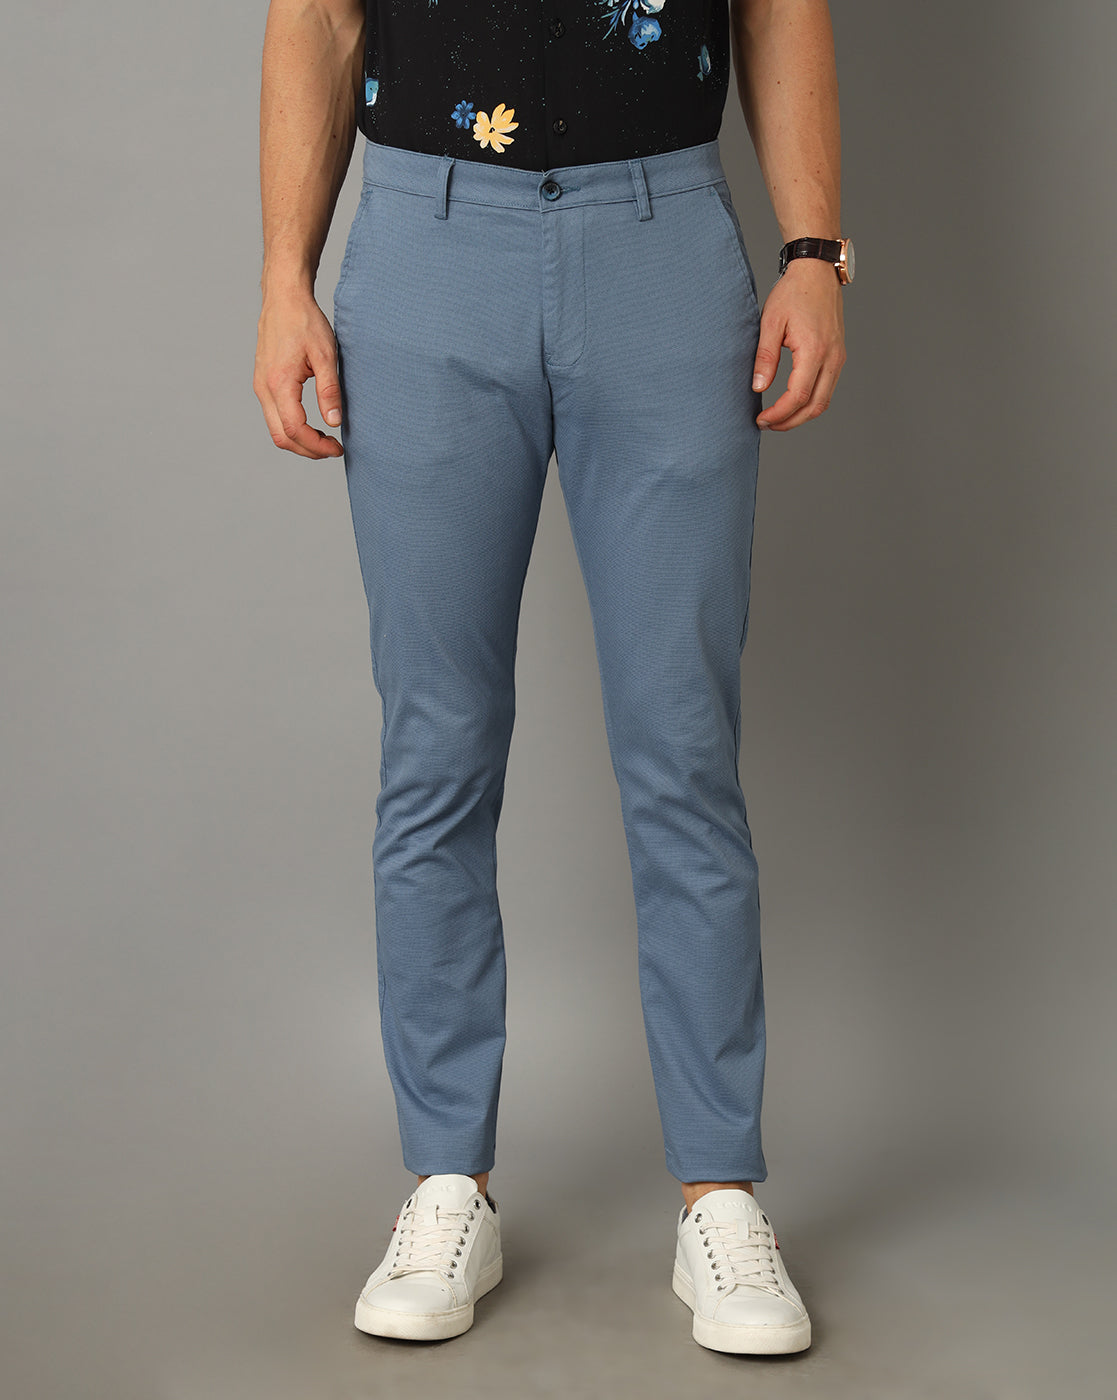 Classic Polo Men's 100% Cotton Moderate Fit Solid Blue Color Trouser | TO1-34 C-BLU